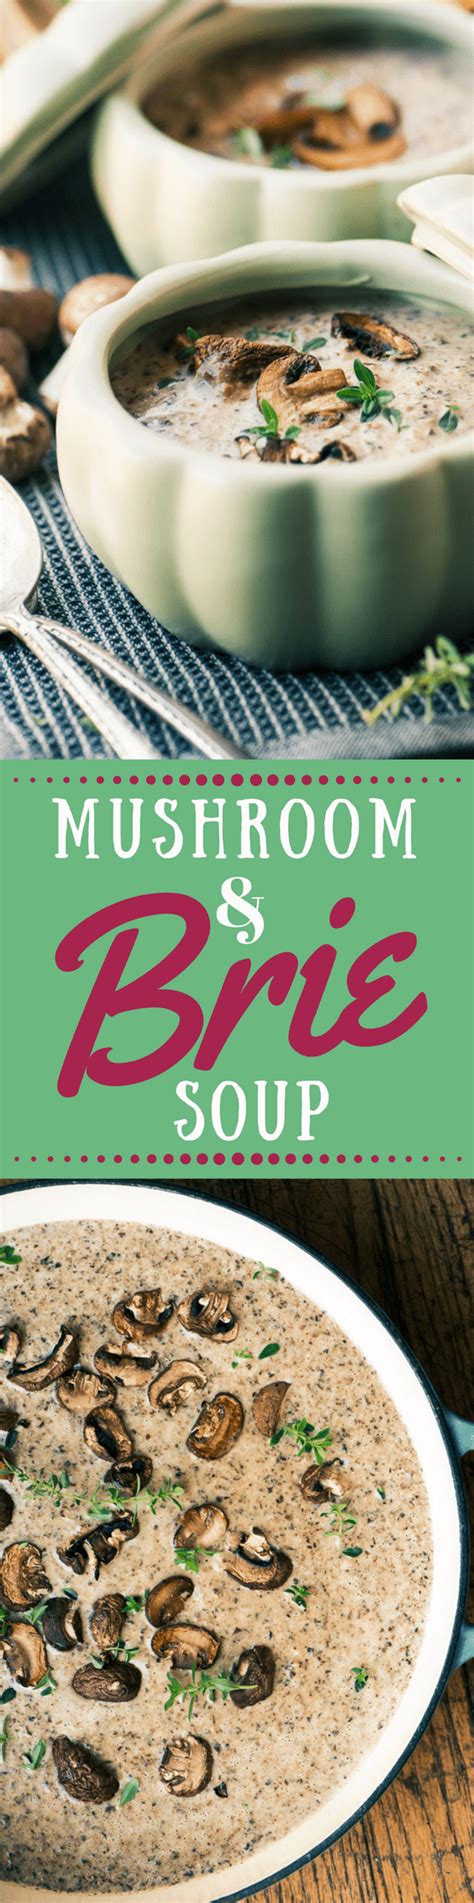 Add the milk and brie, let the brie melt, fish out the rinds and season with salt and pepper to taste before pureeing to the desired consistency and enjoy! Mushroom and Brie Soup | The View from Great Island